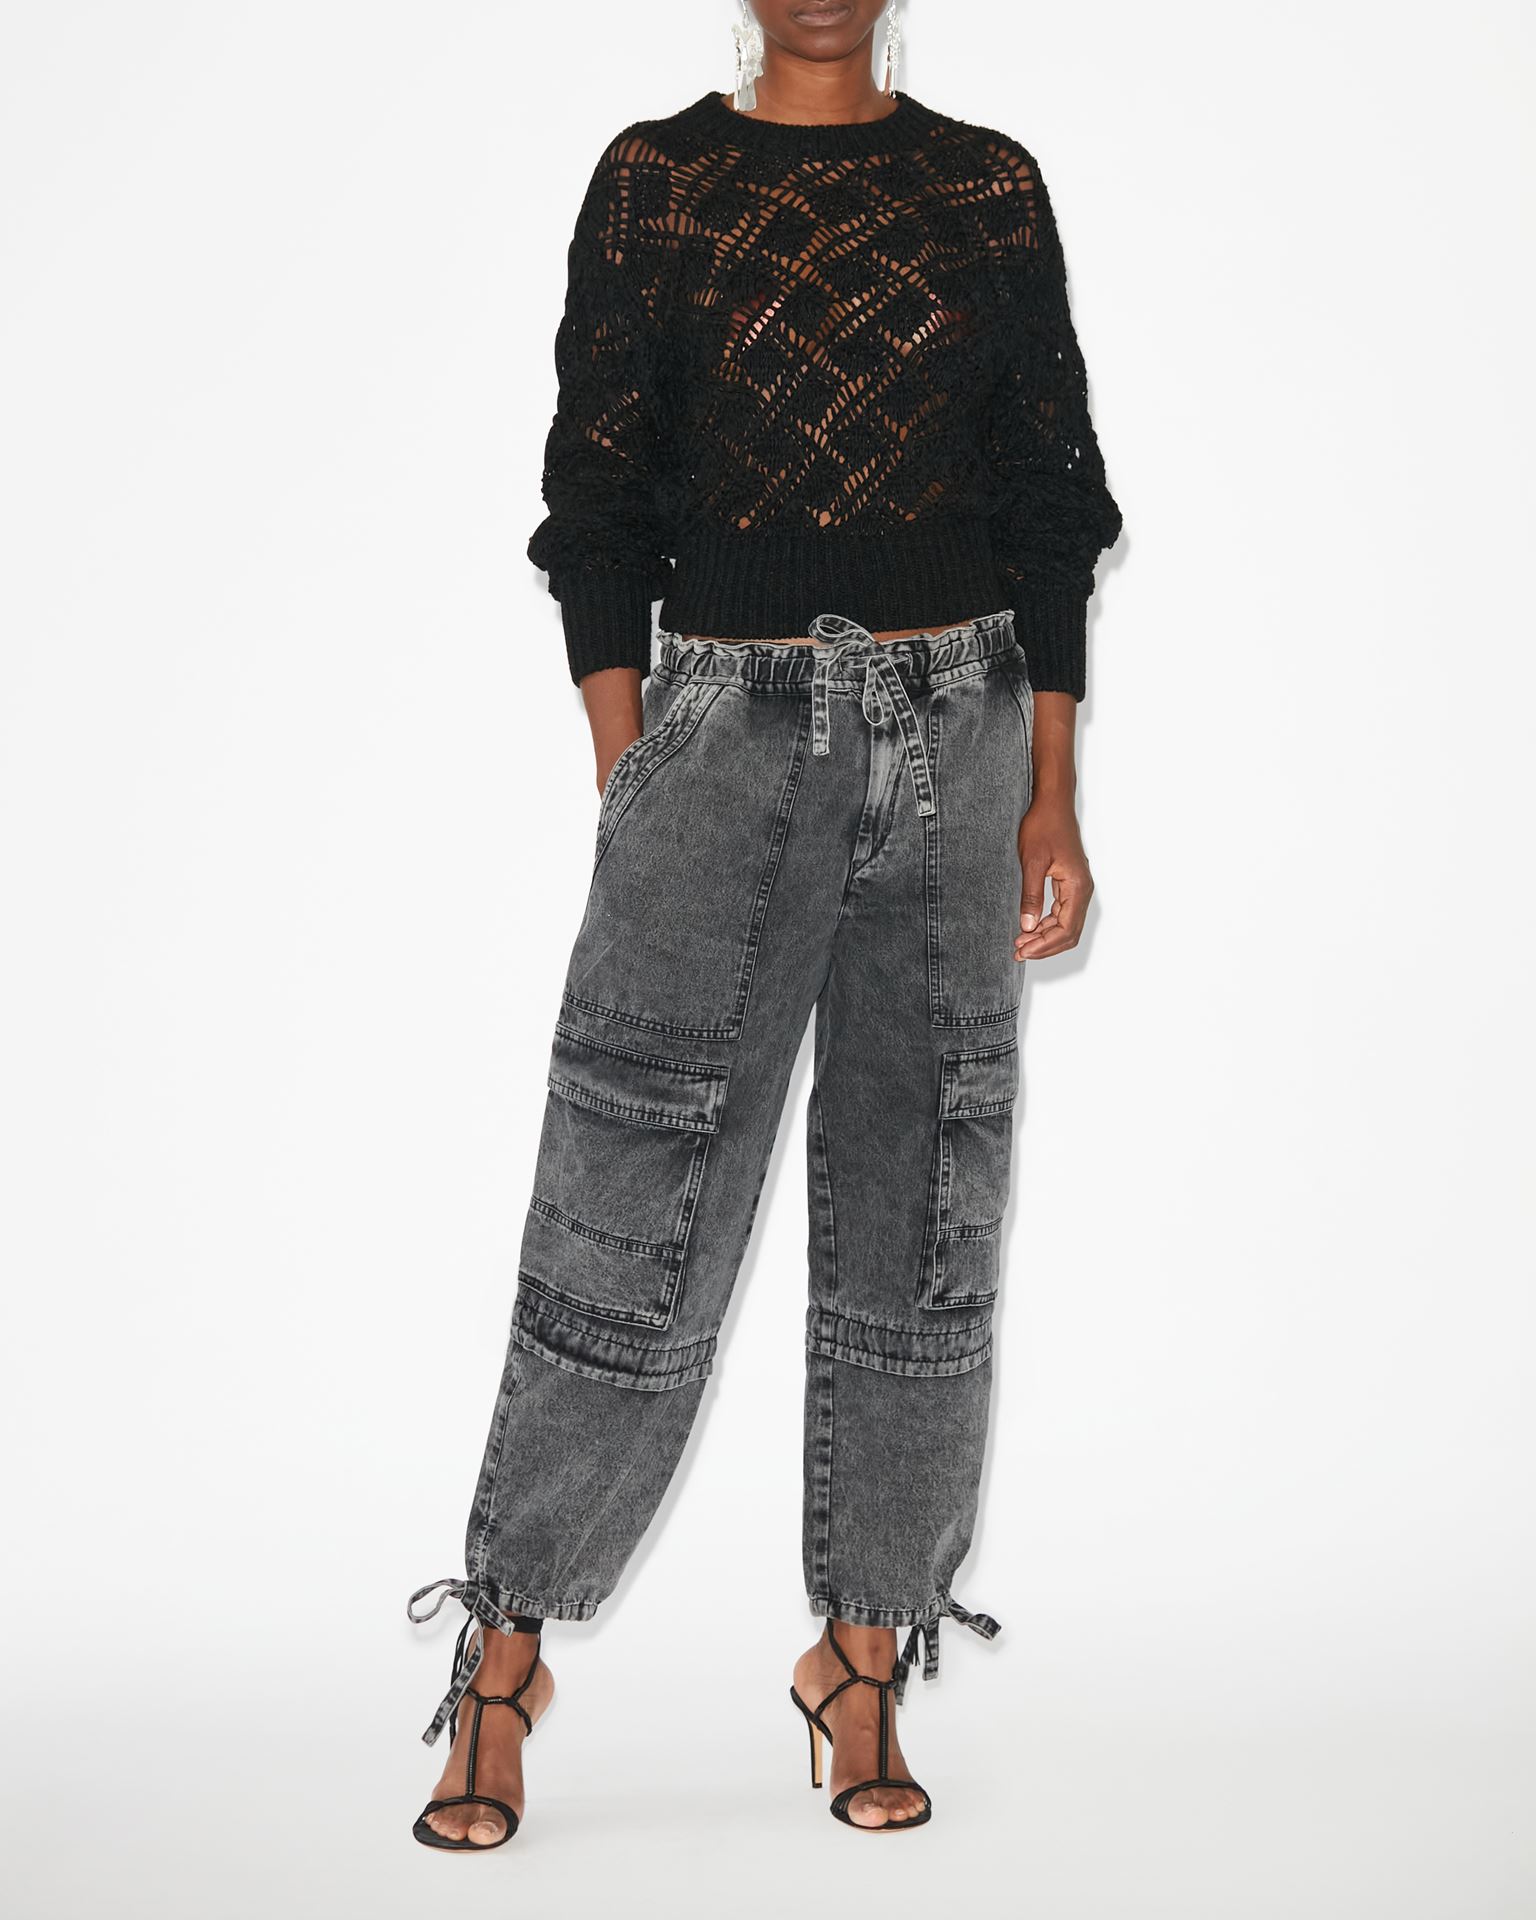 Isabel Marant MARANT ÉTOILE, IVY TROUSERS - Mujer - Gris